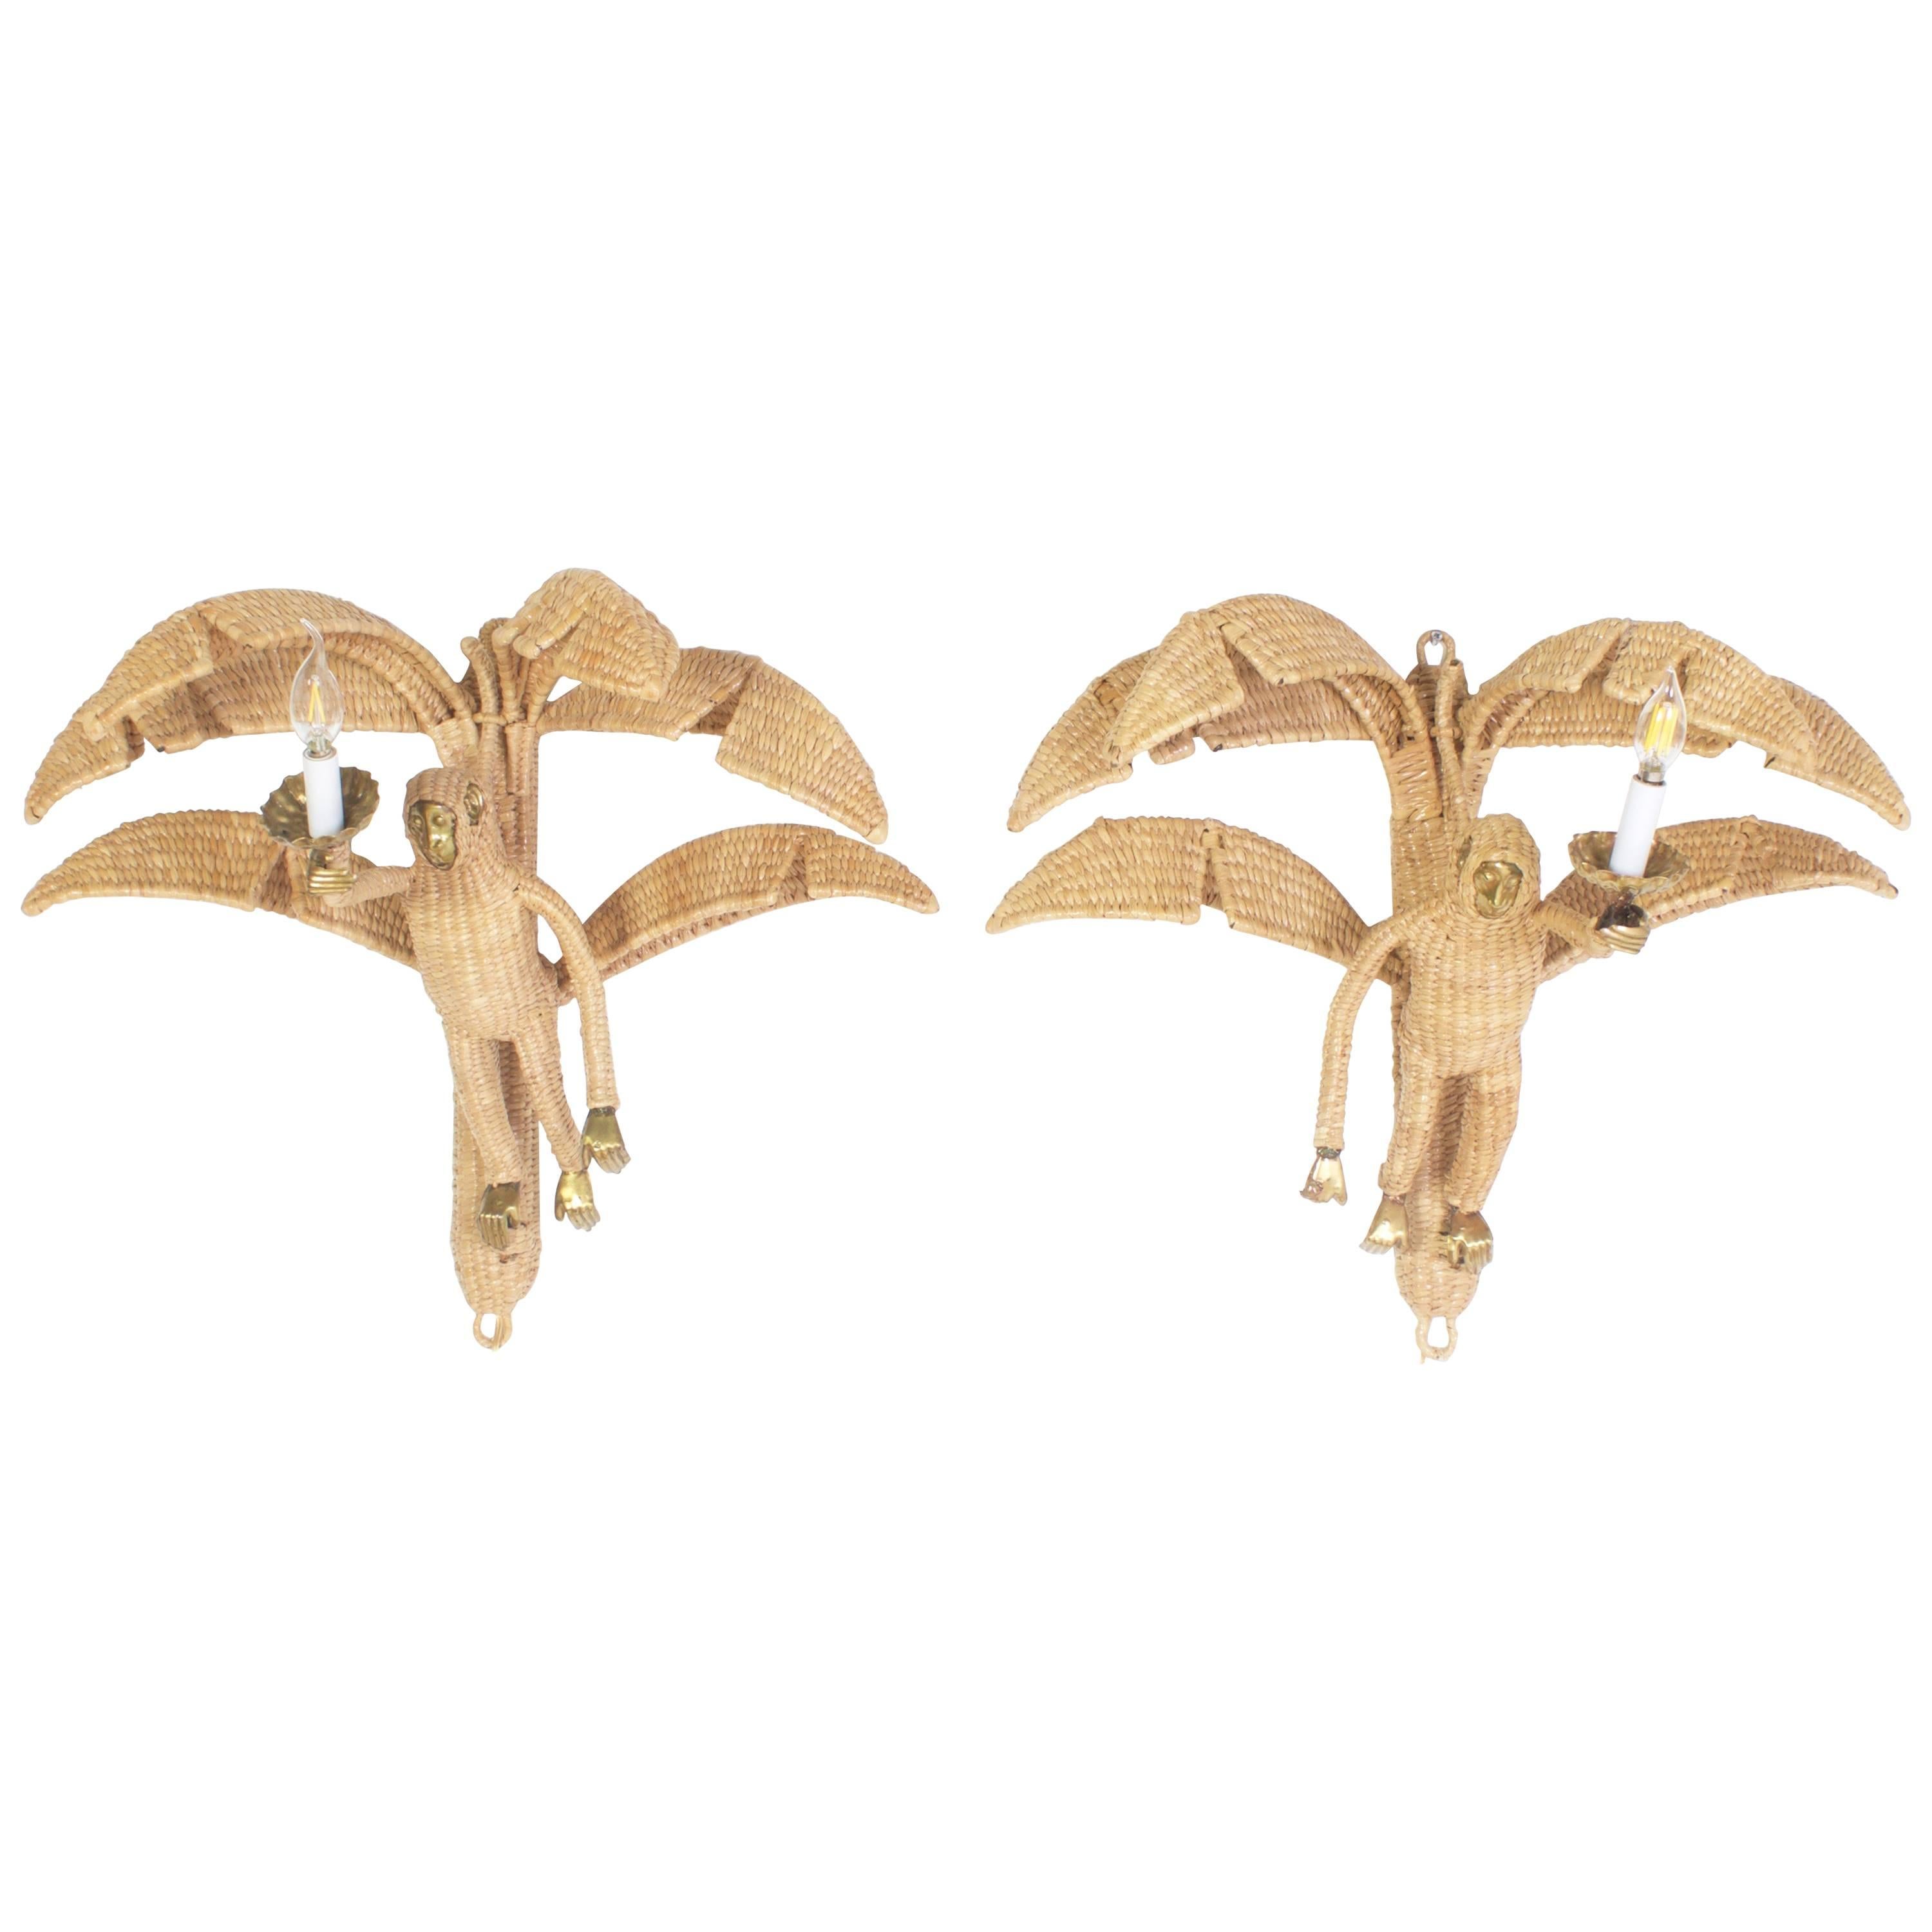 Amusing Pair of Mario Torres Wicker Monkey Sconces with Palm Leaves